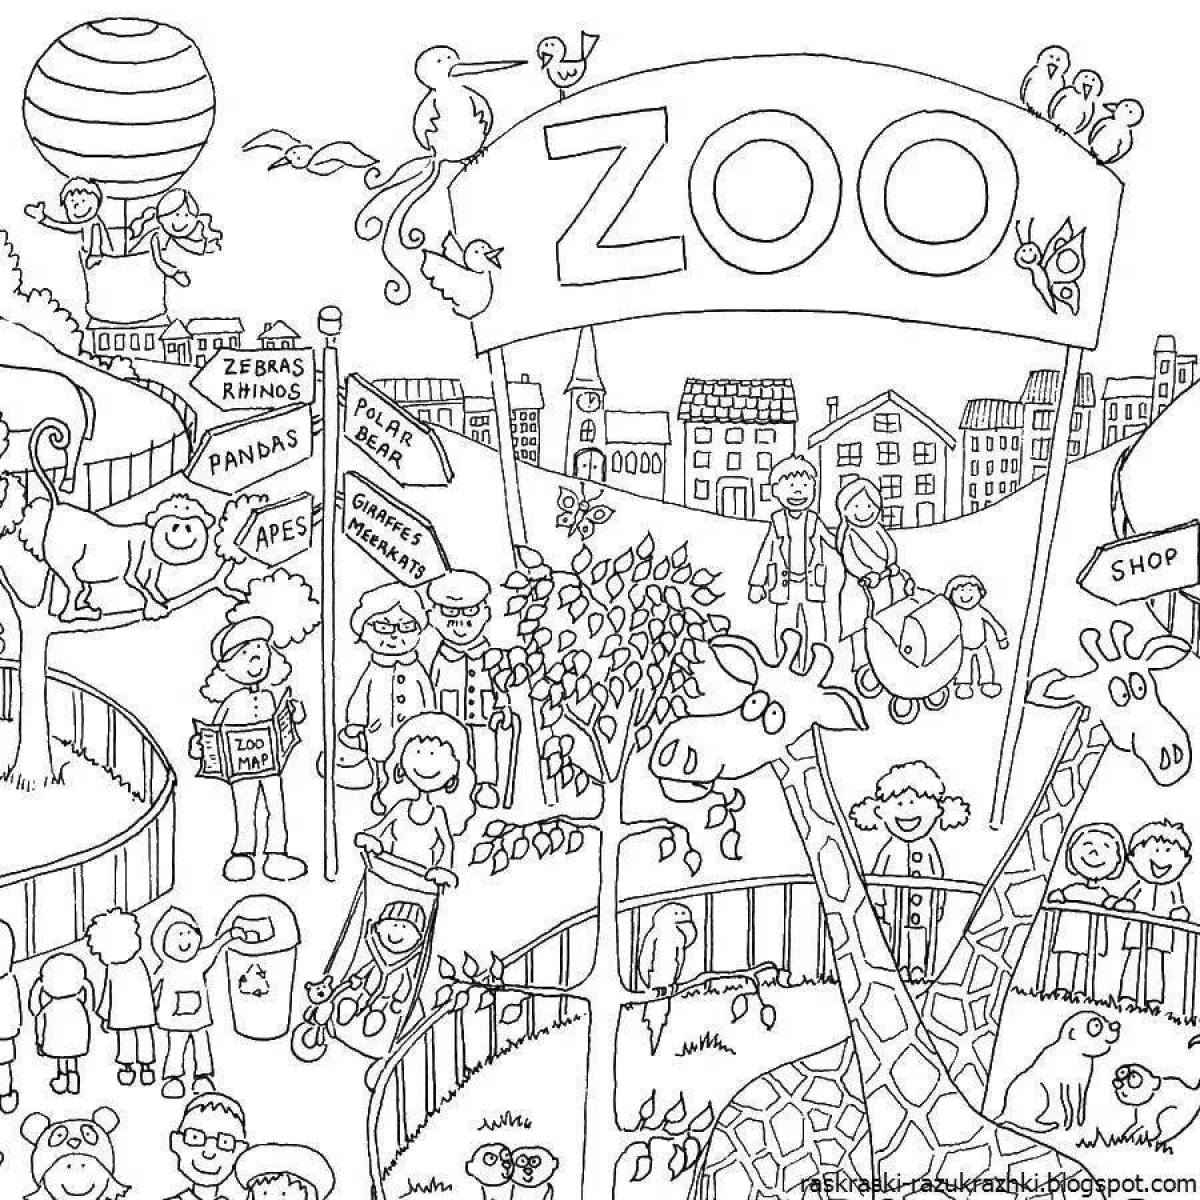 Colorful zoo coloring book for children 5-6 years old